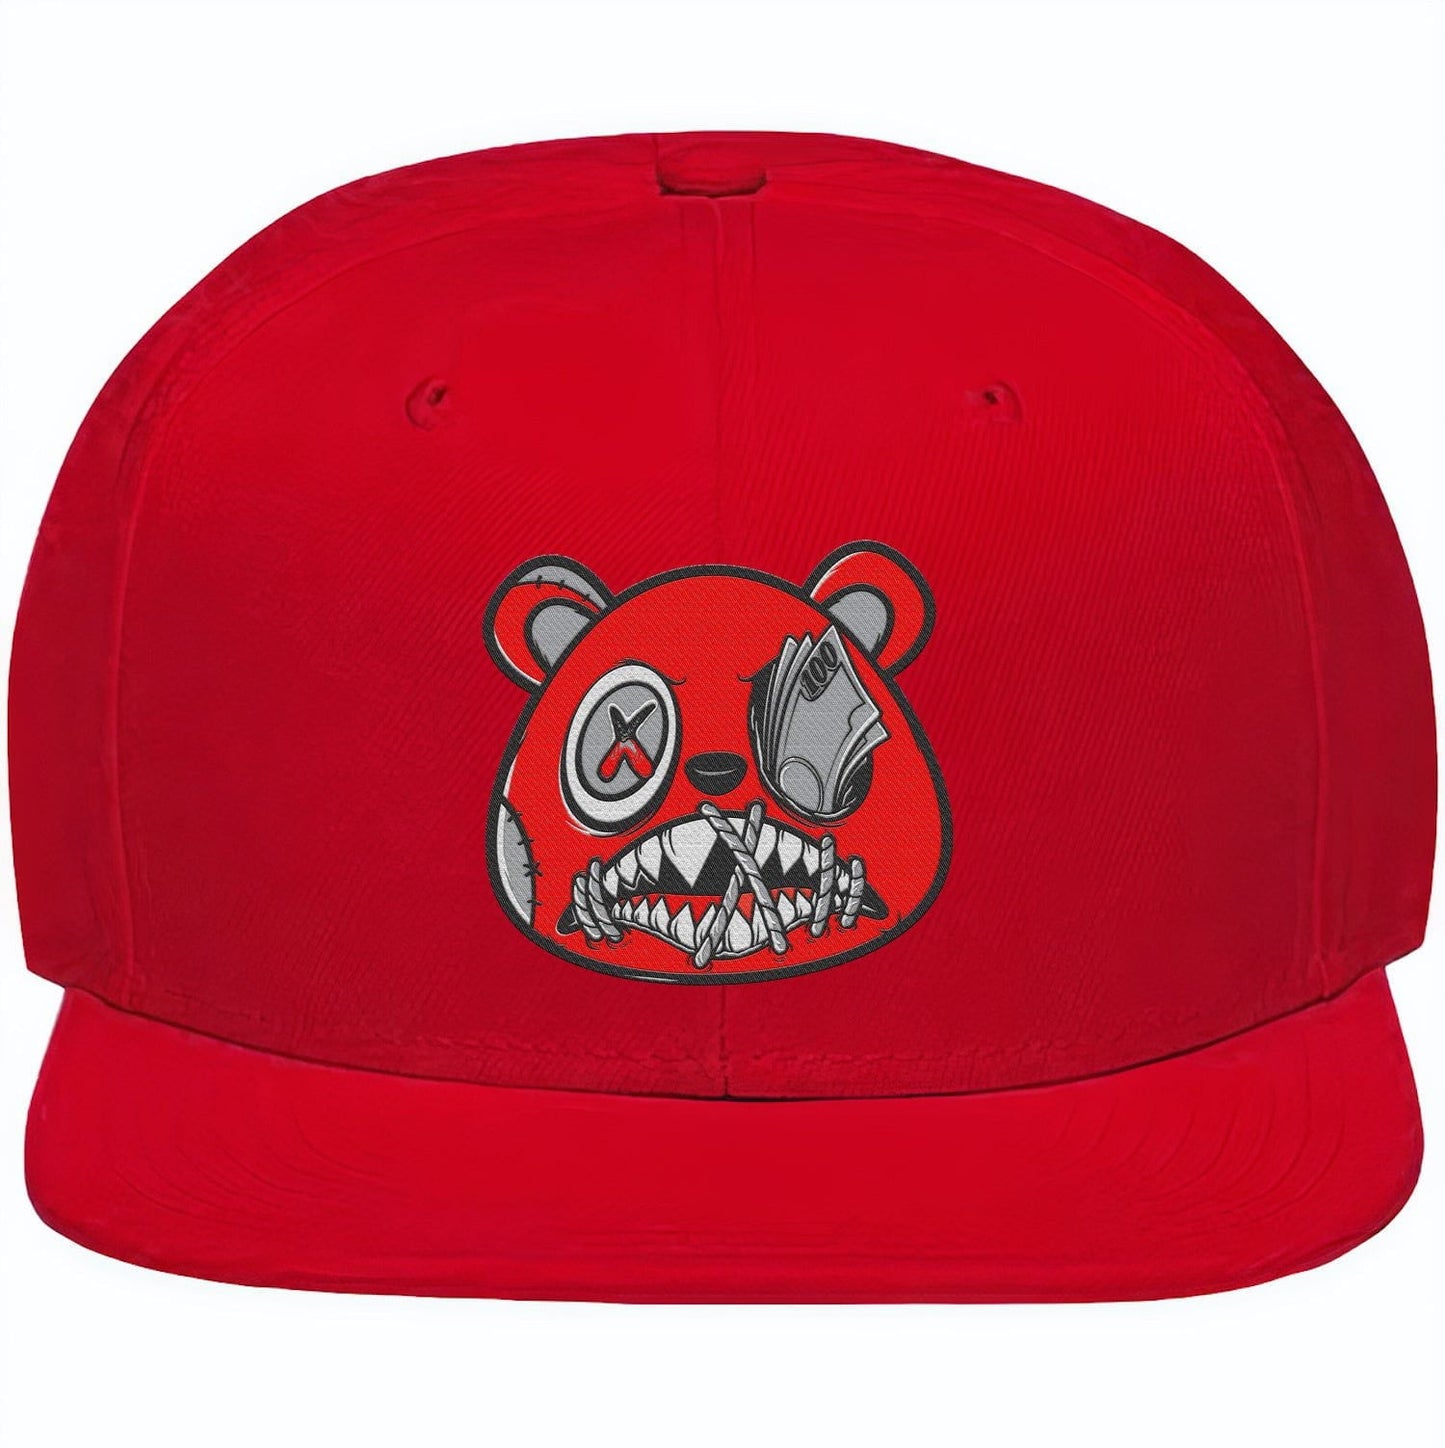 Red Taxi 12s Snapback Hat - Jordan 12 Red Taxis Hats - Money Talks